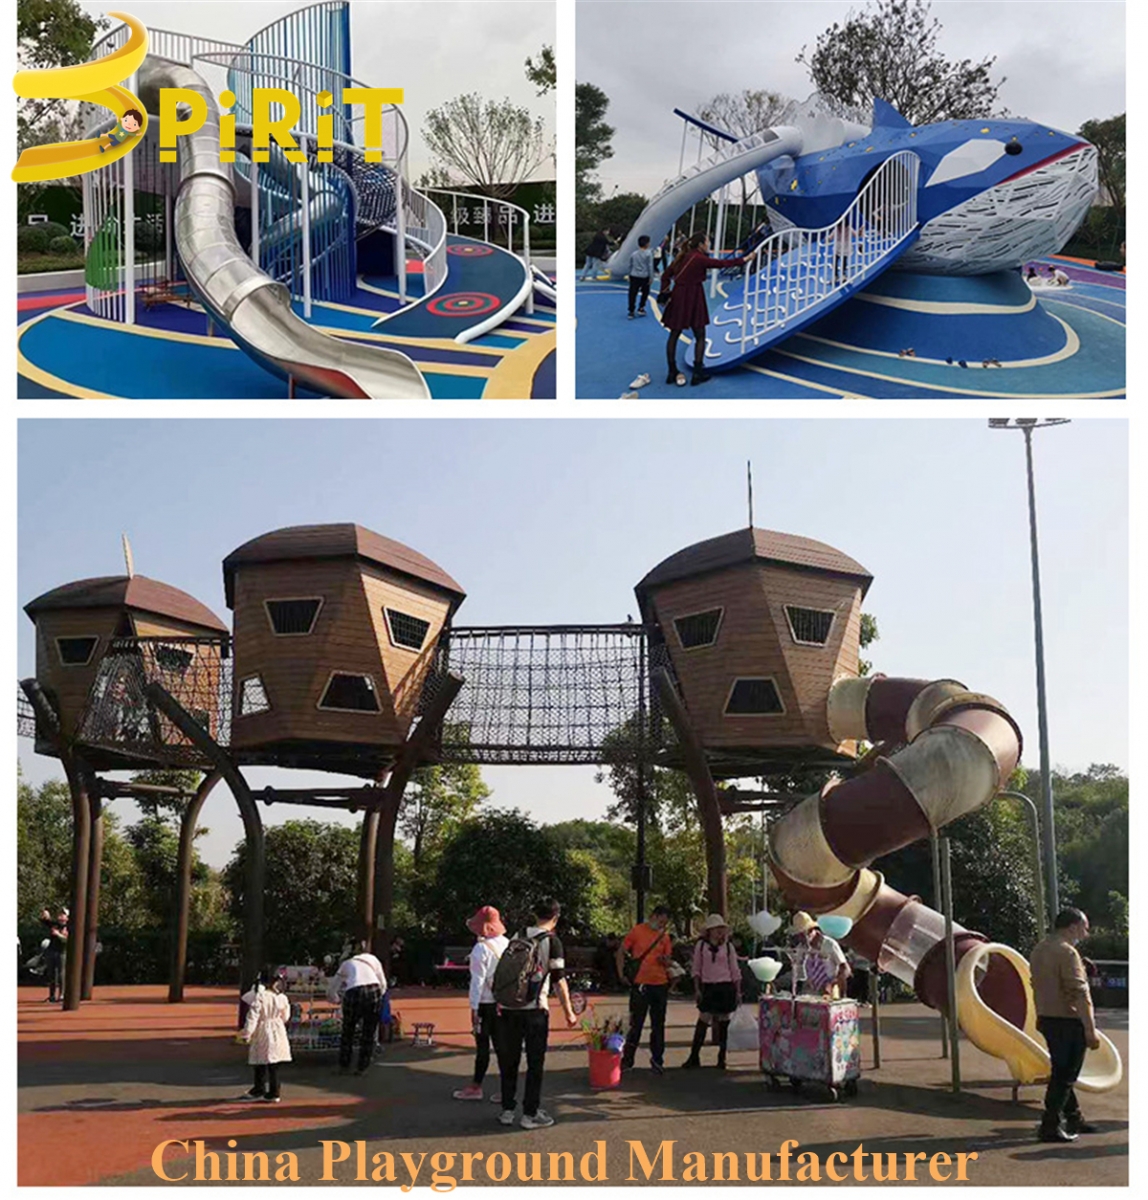 New adventure play park with stainless steel slide to buy.-SPIRIT PLAY,Outdoor Playground, Indoor Playground,Trampoline Park,Outdoor Fitness,Inflatable,Soft Playground,Ninja Warrior,Trampoline Park,Playground Structure,Play Structure,Outdoor Fitness,Water Park,Play System,Freestanding,Interactive,independente ,Inklusibo, Park, Pagsaka sa Bungbong, Dula sa Bata